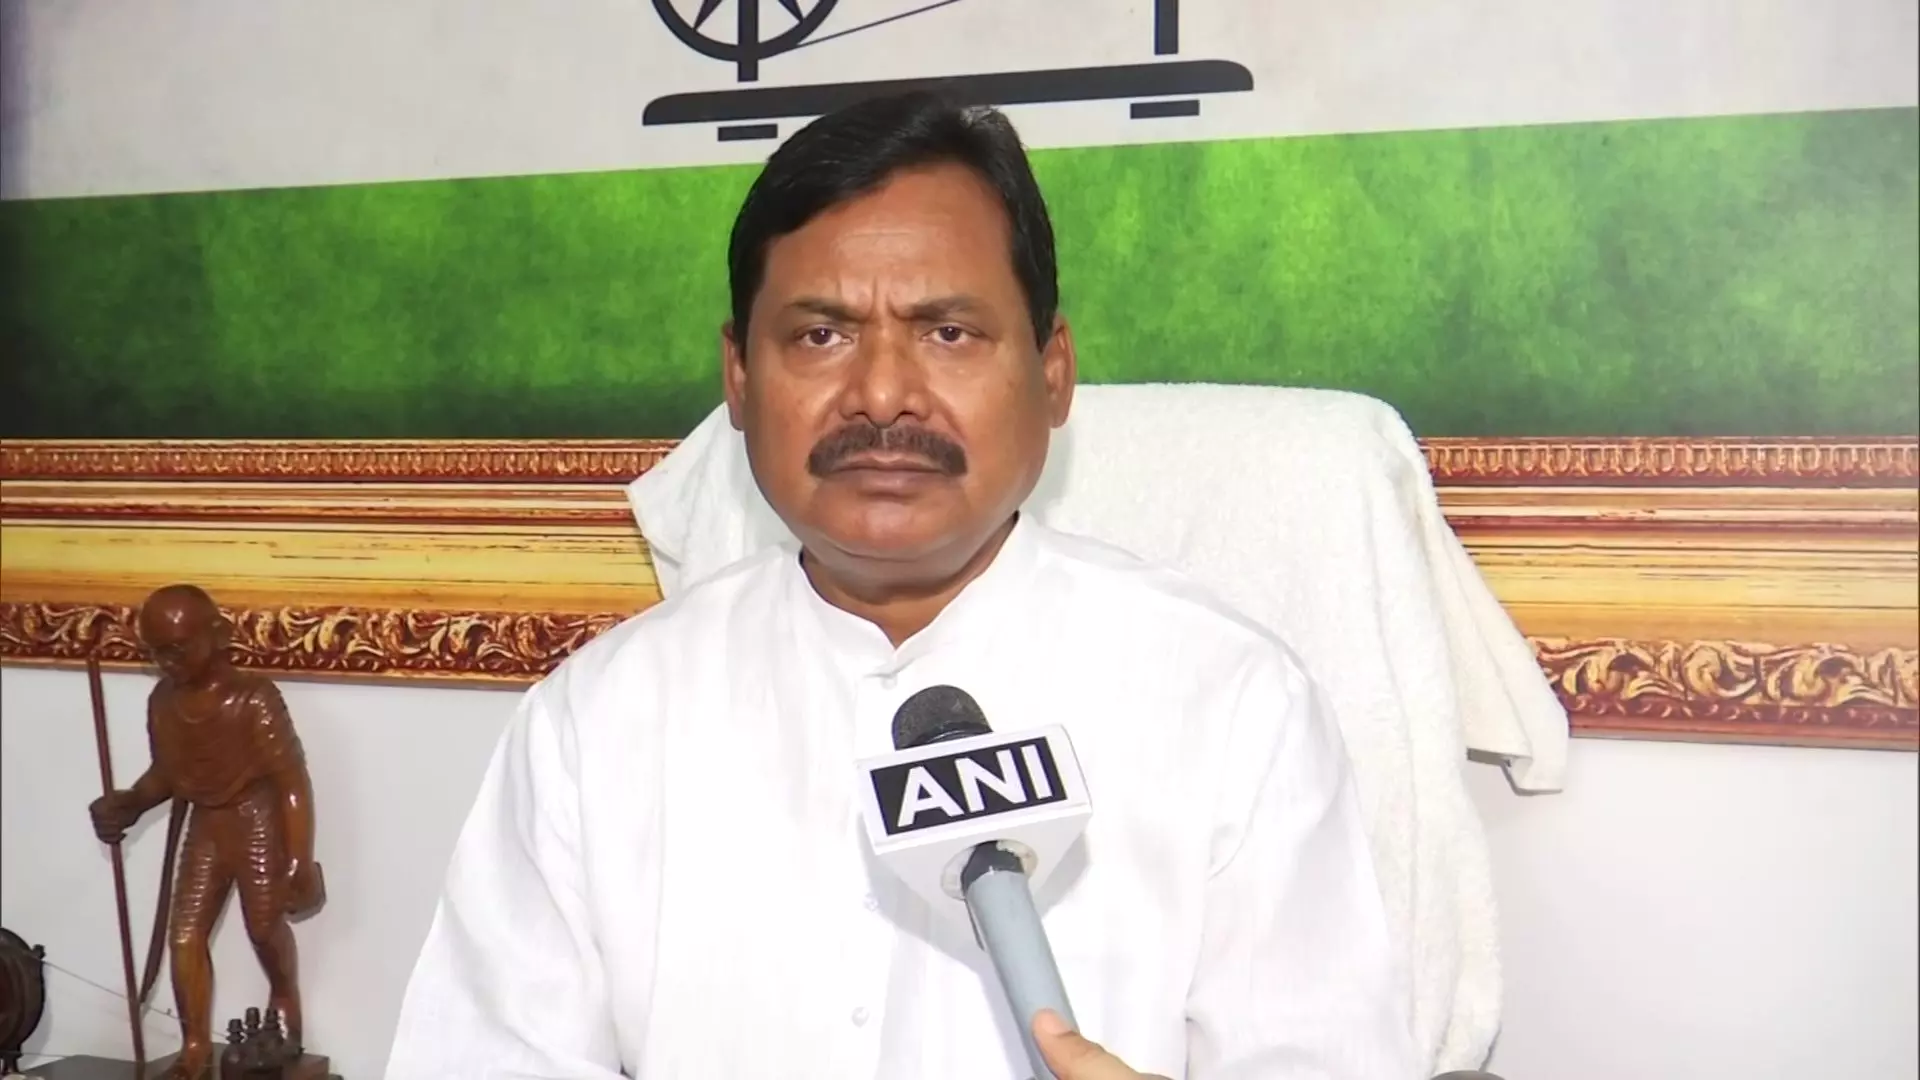 BJD-BJP forming alliance to ‘loot’ natural resources of Odisha: Congress